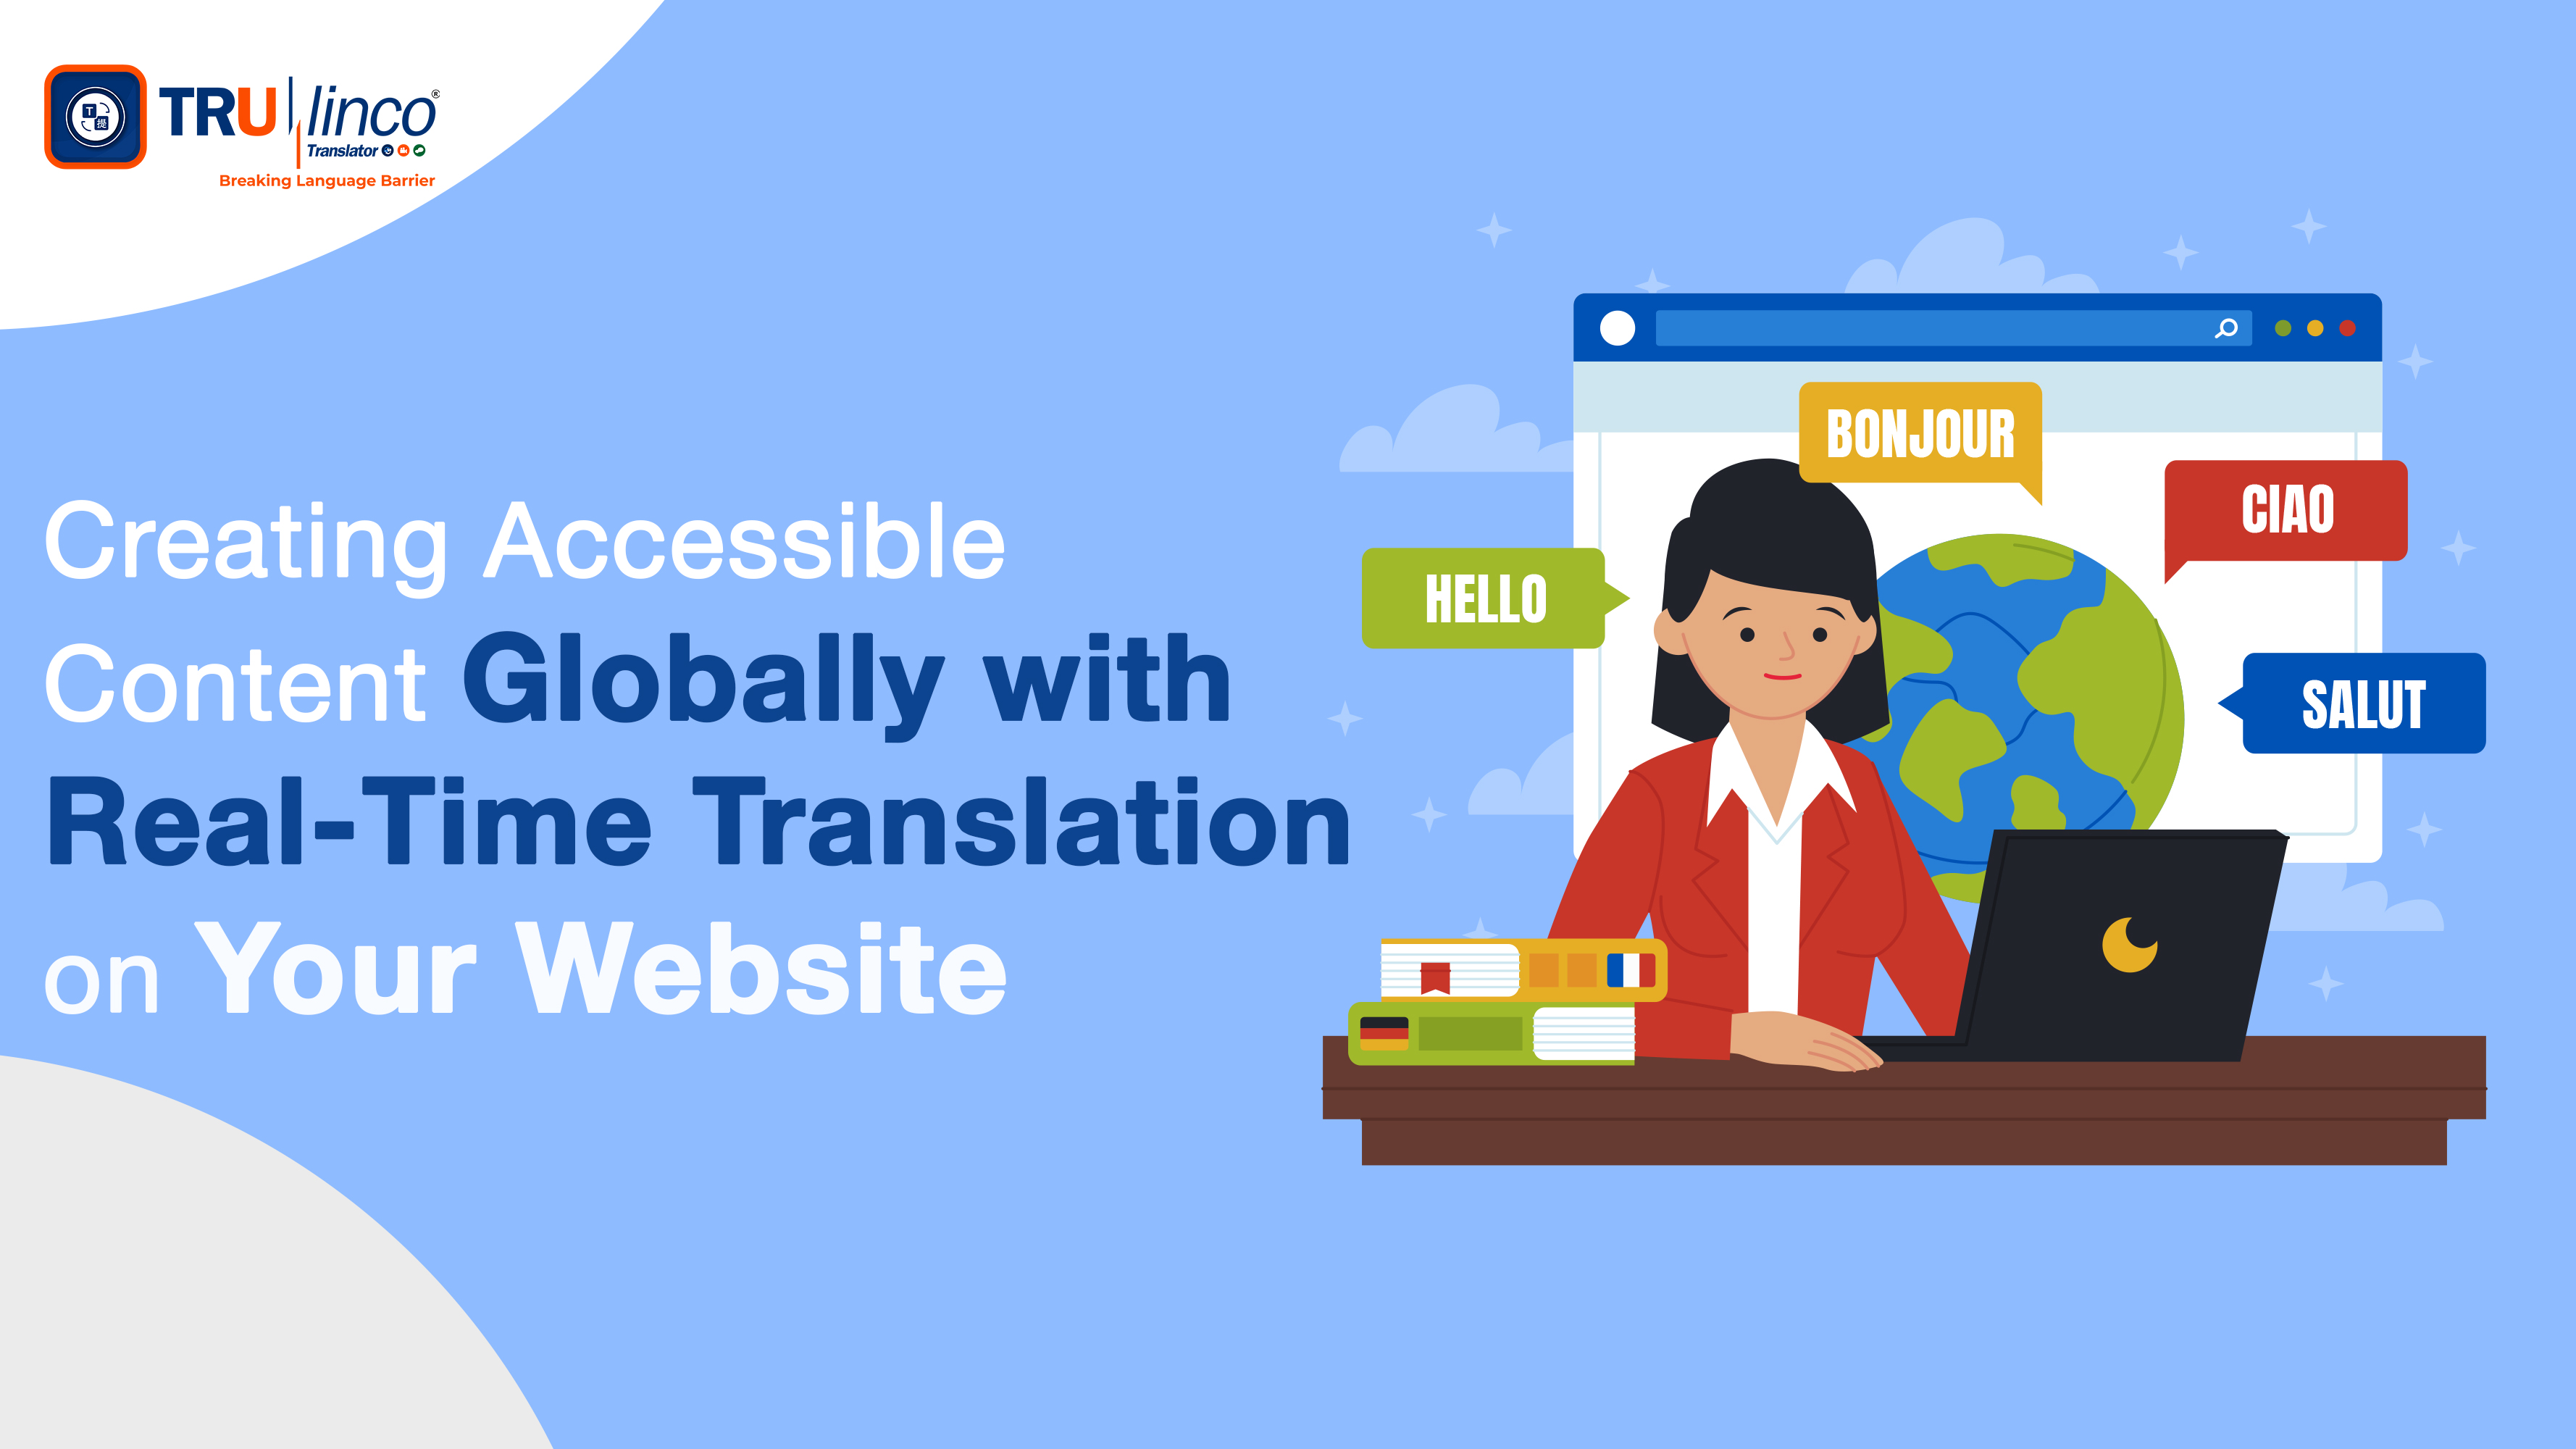 Creating Accessible Content Globally with Real-Time Translation on Your Website